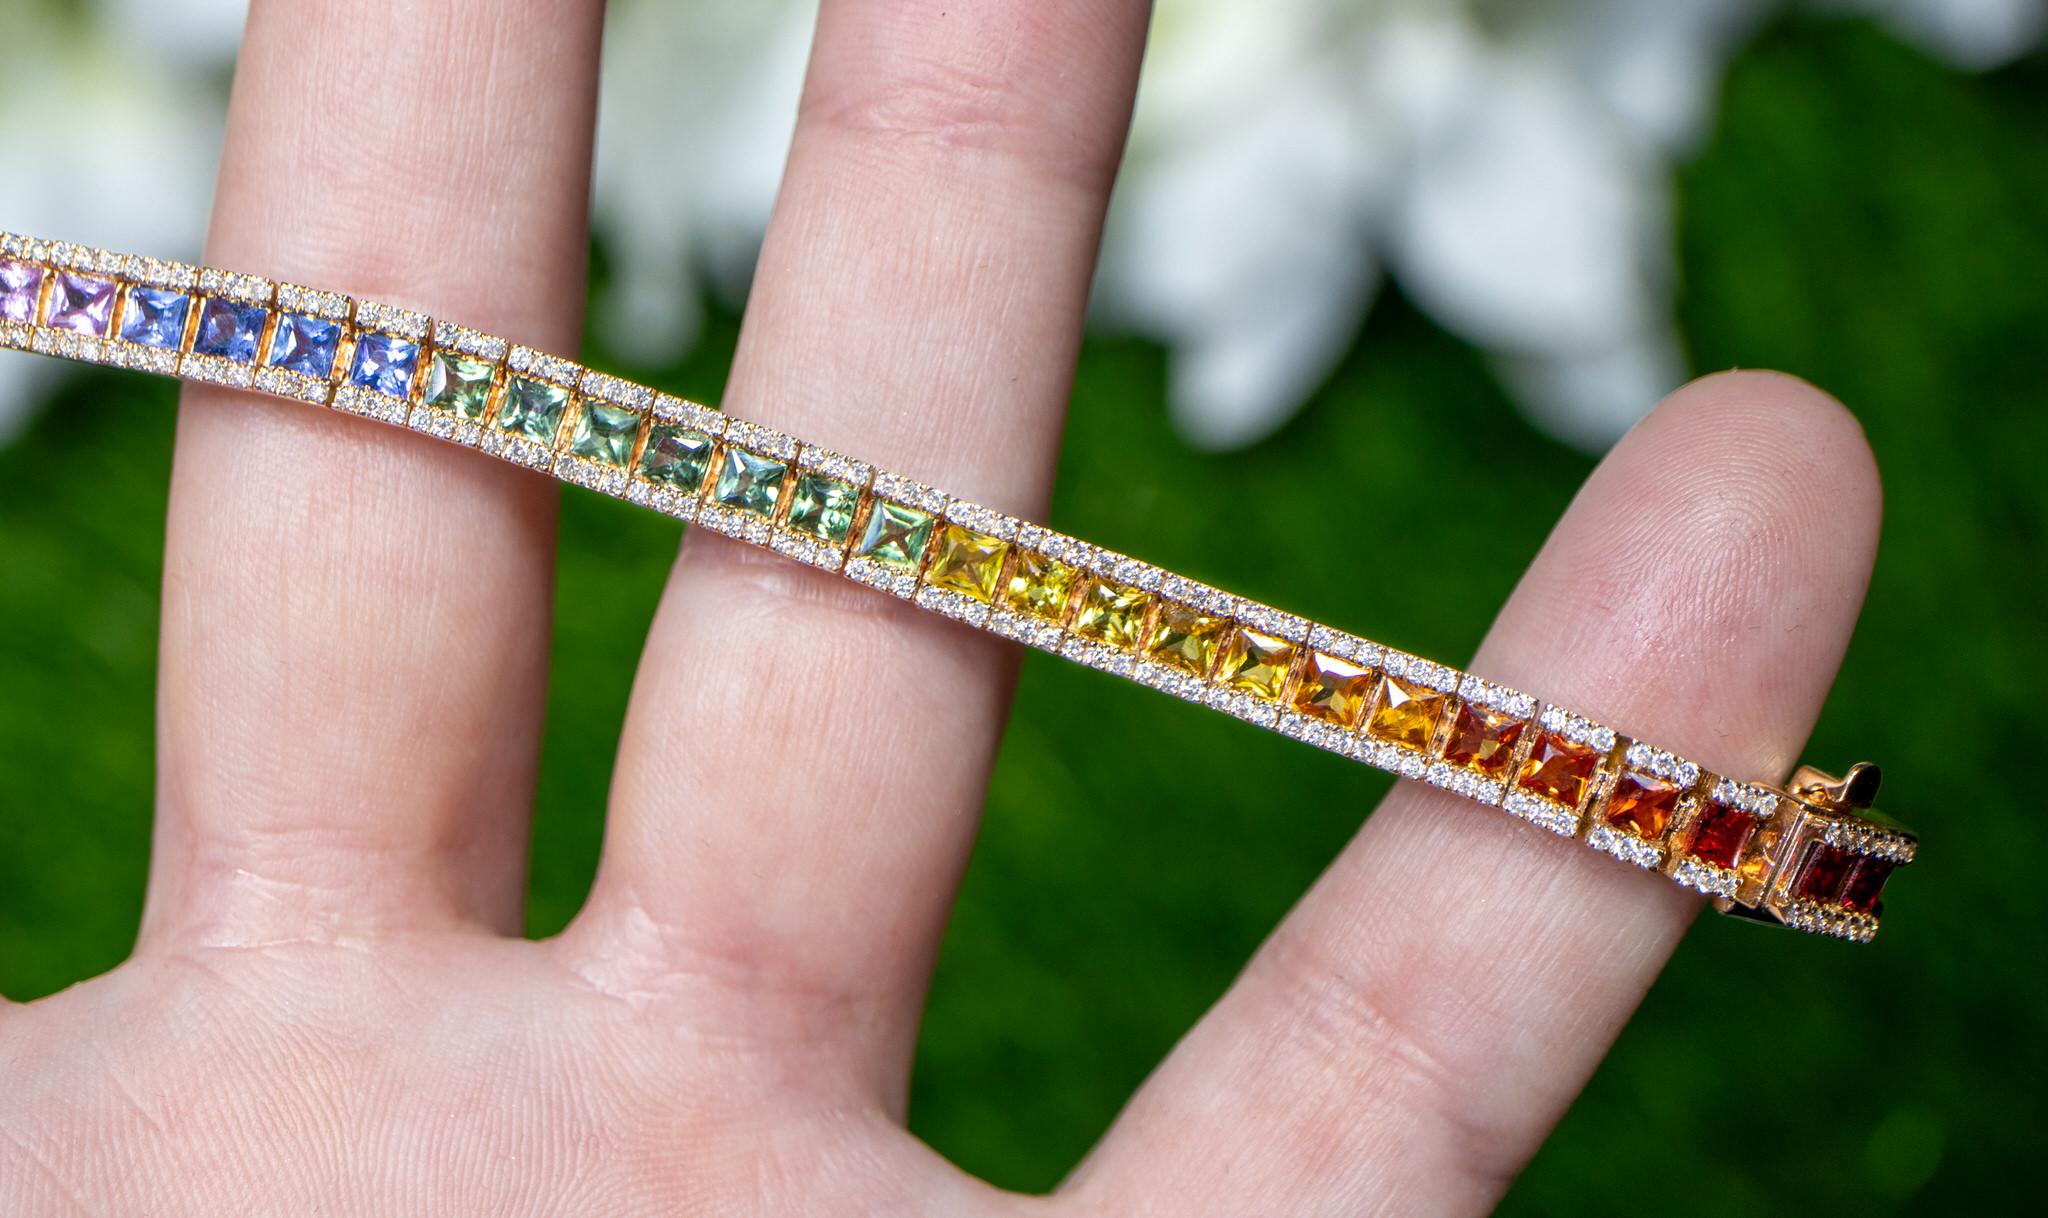 Multicolor Sapphires Rainbow Bracelet Diamond Setting 8.9 Carats 18K Rose Gold In Excellent Condition For Sale In Laguna Niguel, CA